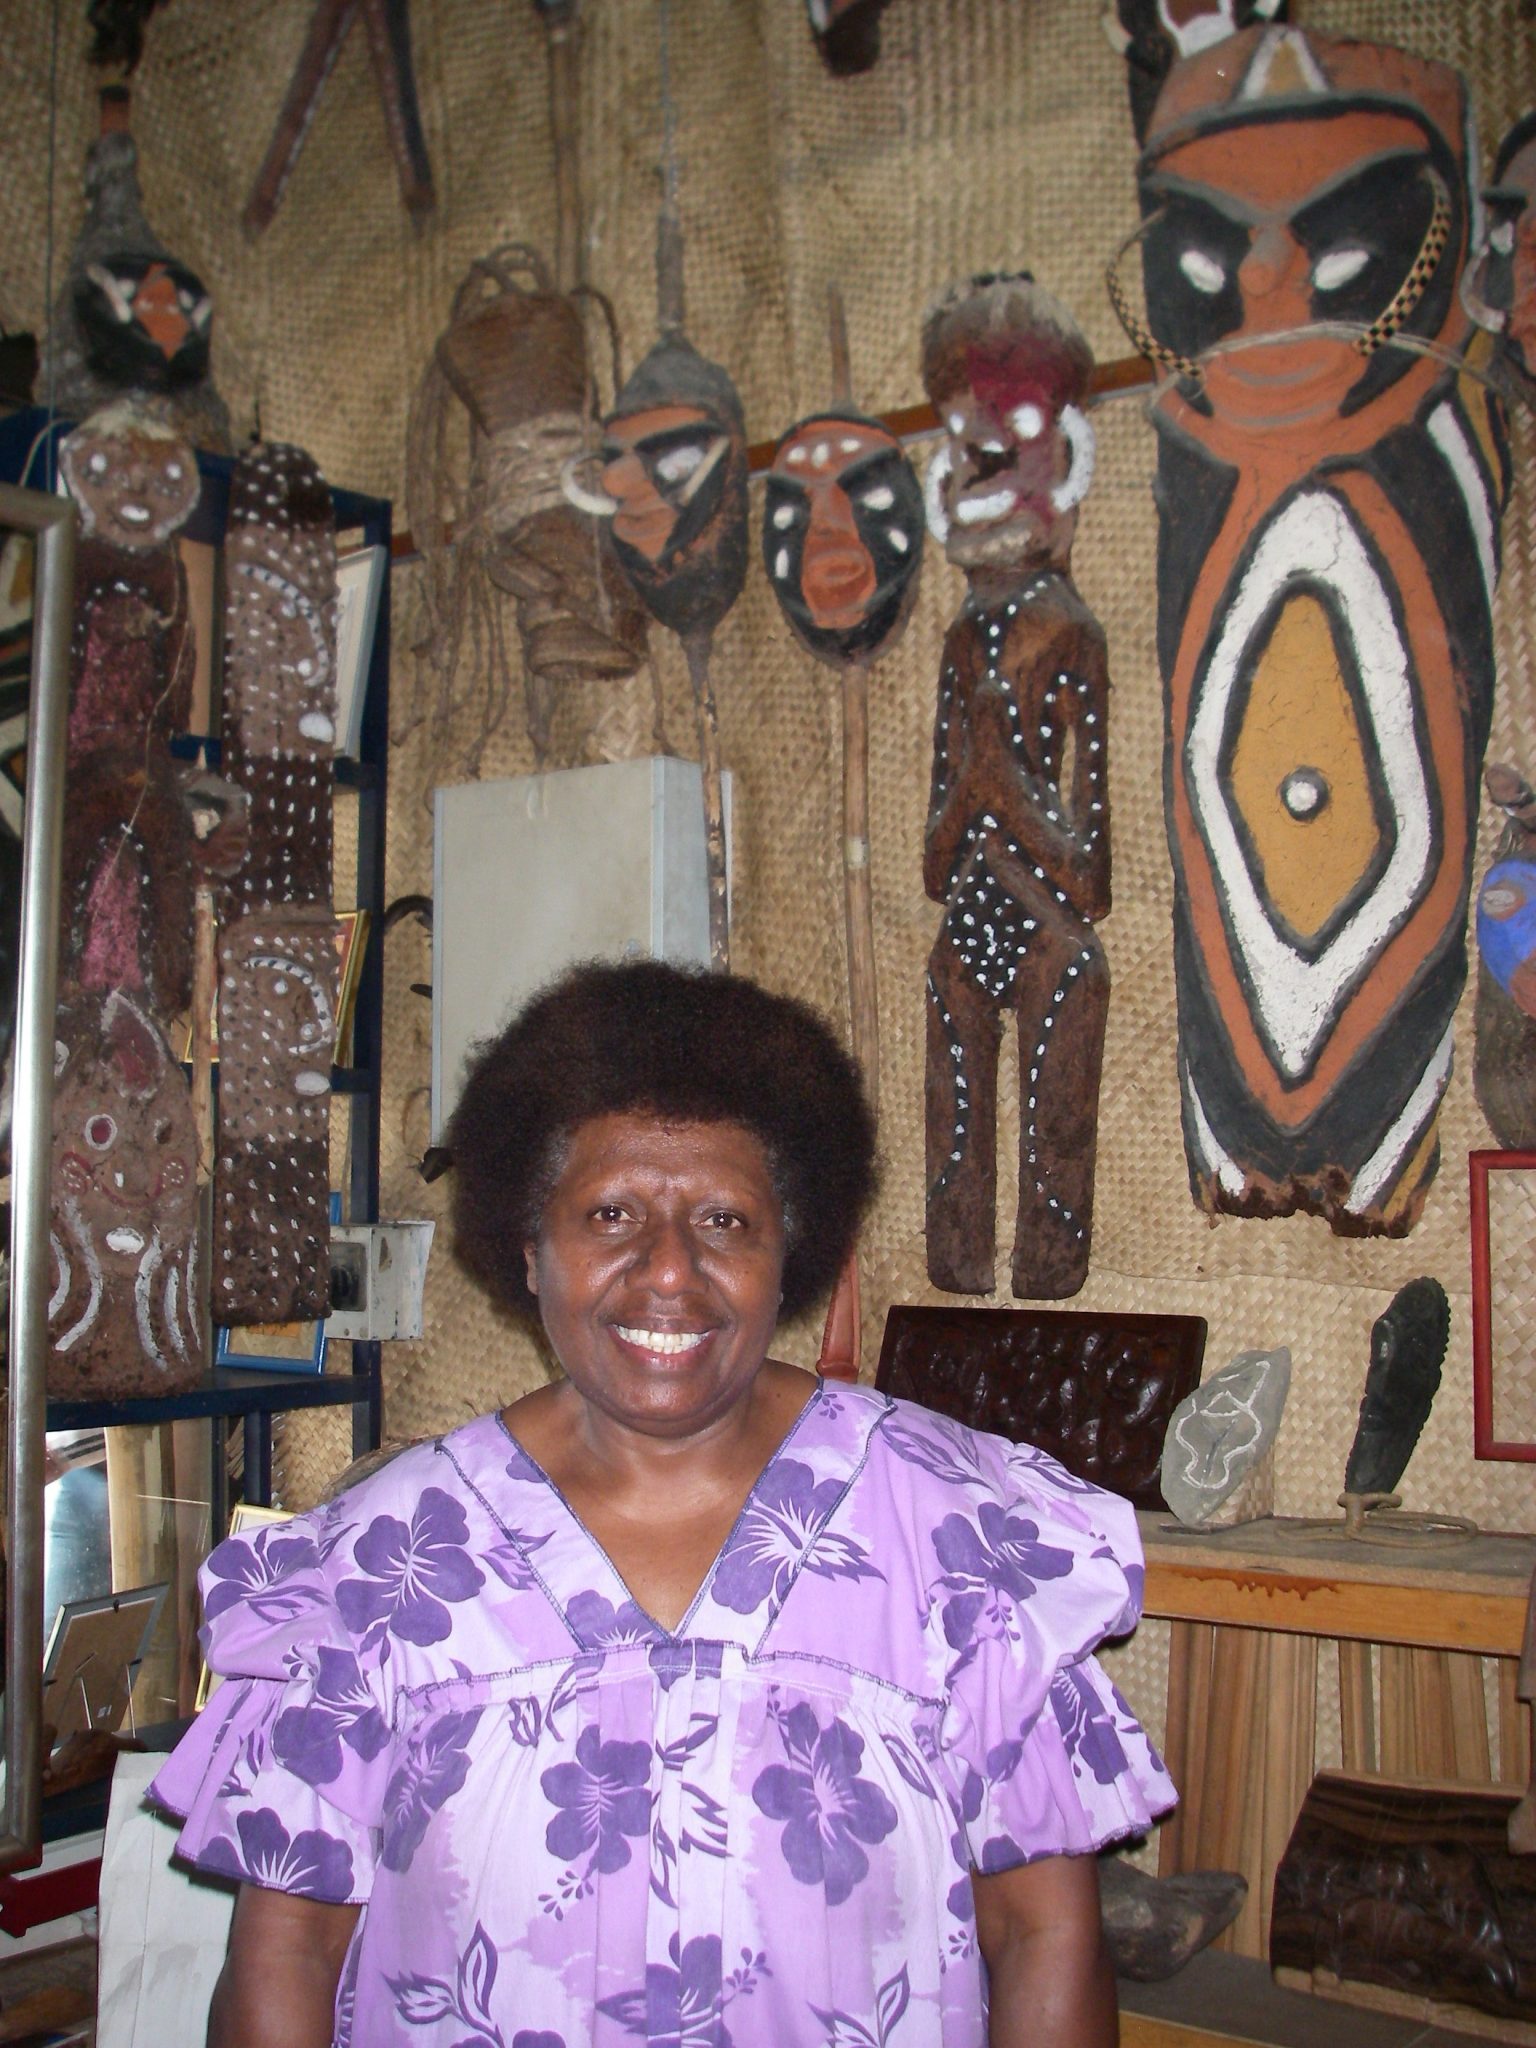 84-maria-the-owner-of-an-artifact-store-in-port-vila-became-my-local-friend-while-in-vanuatu-although-her-house-was-damaged-she-and-her-family-survived-cyclone-pam-by-the-grace-of-god